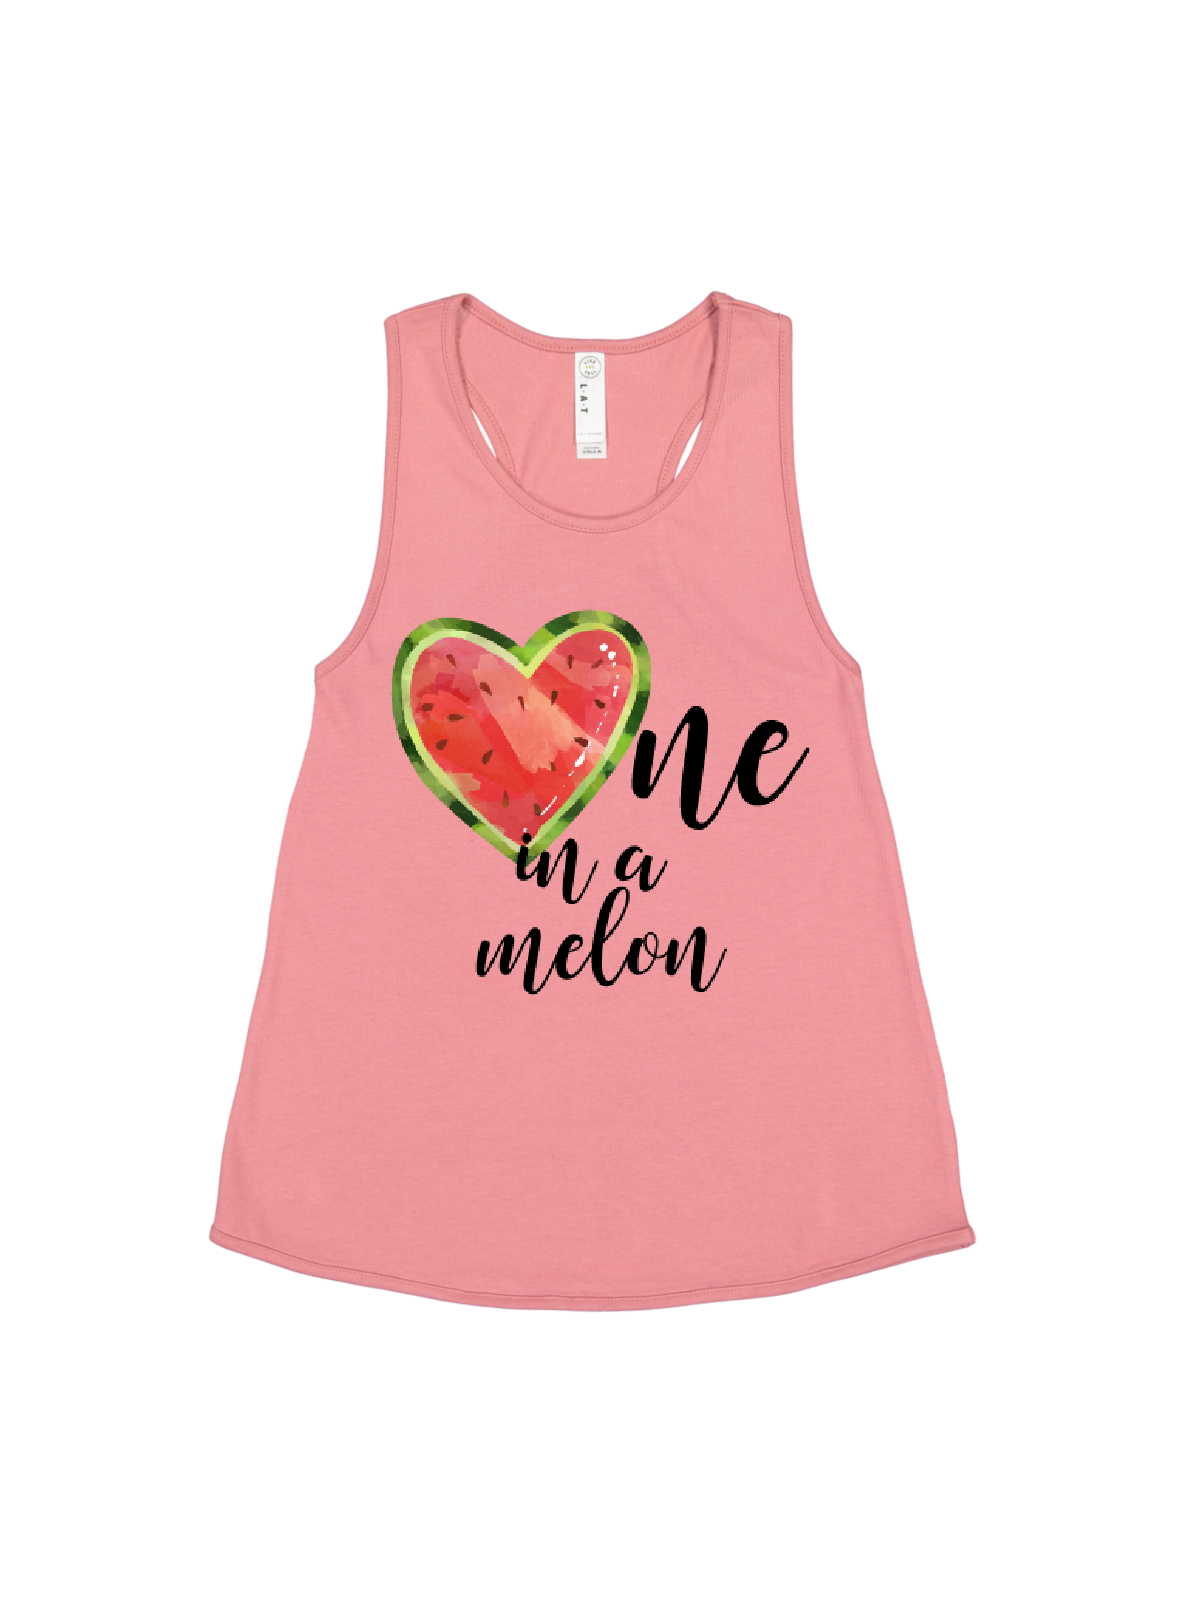 girls one in a melon watermelon tank tops in white, black, and red